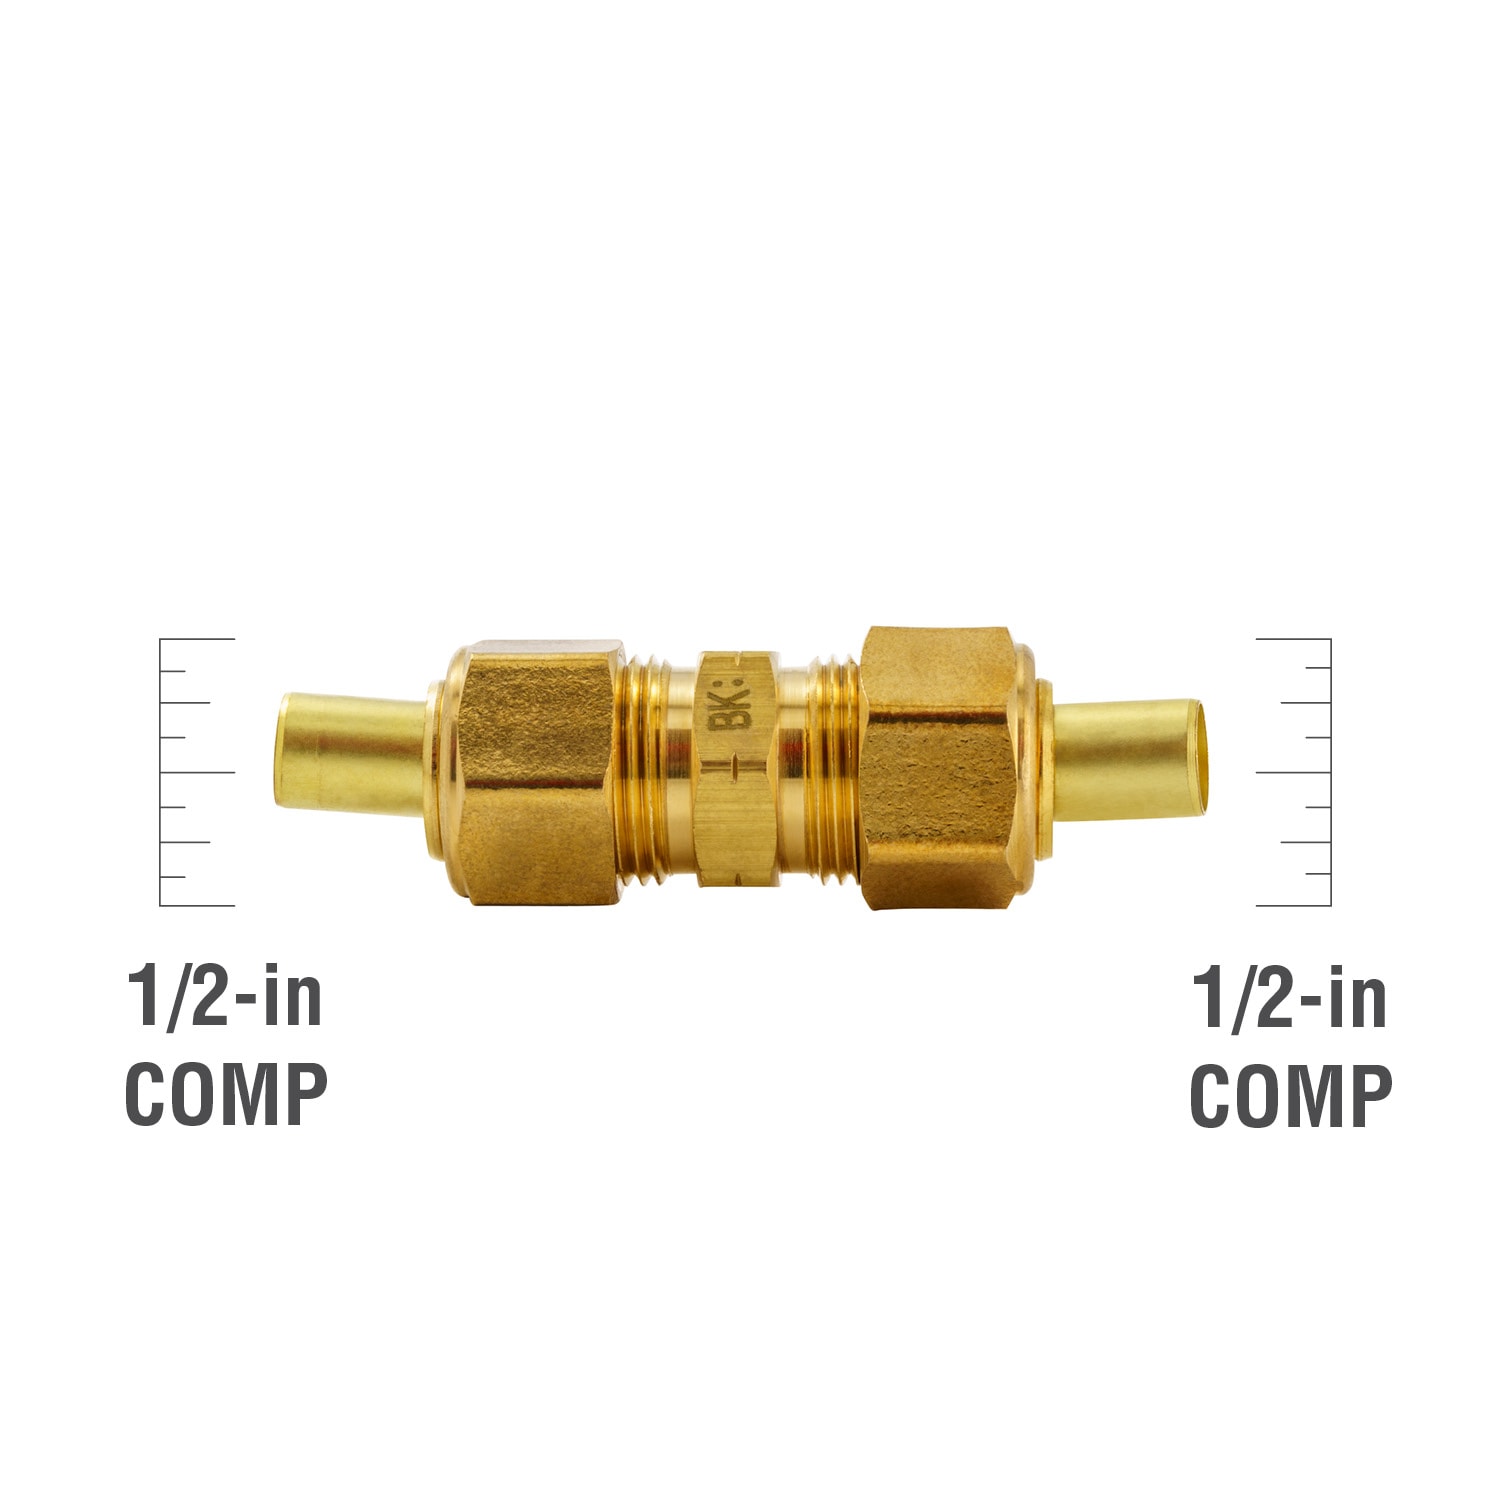 Proline Series 1/2-in x 1/2-in Compression Coupling Union Fitting